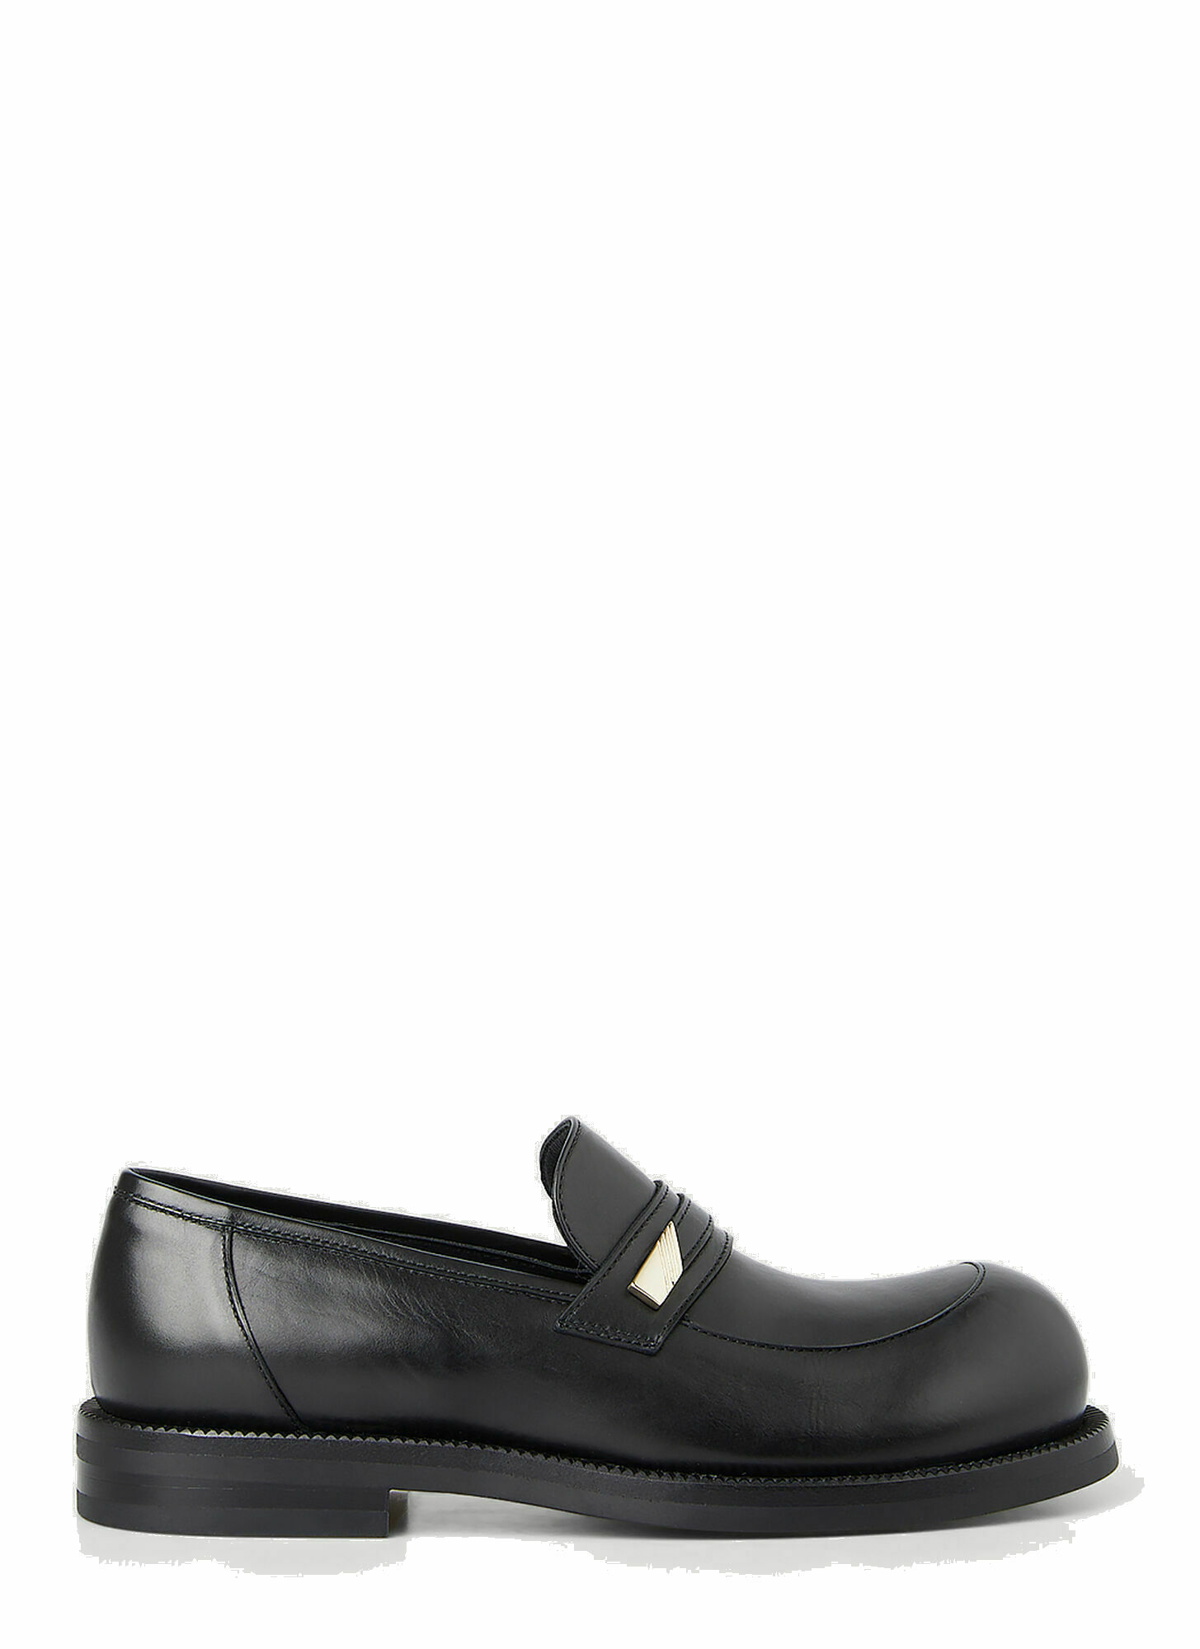 Photo: Bulb Toe Loafers in Black